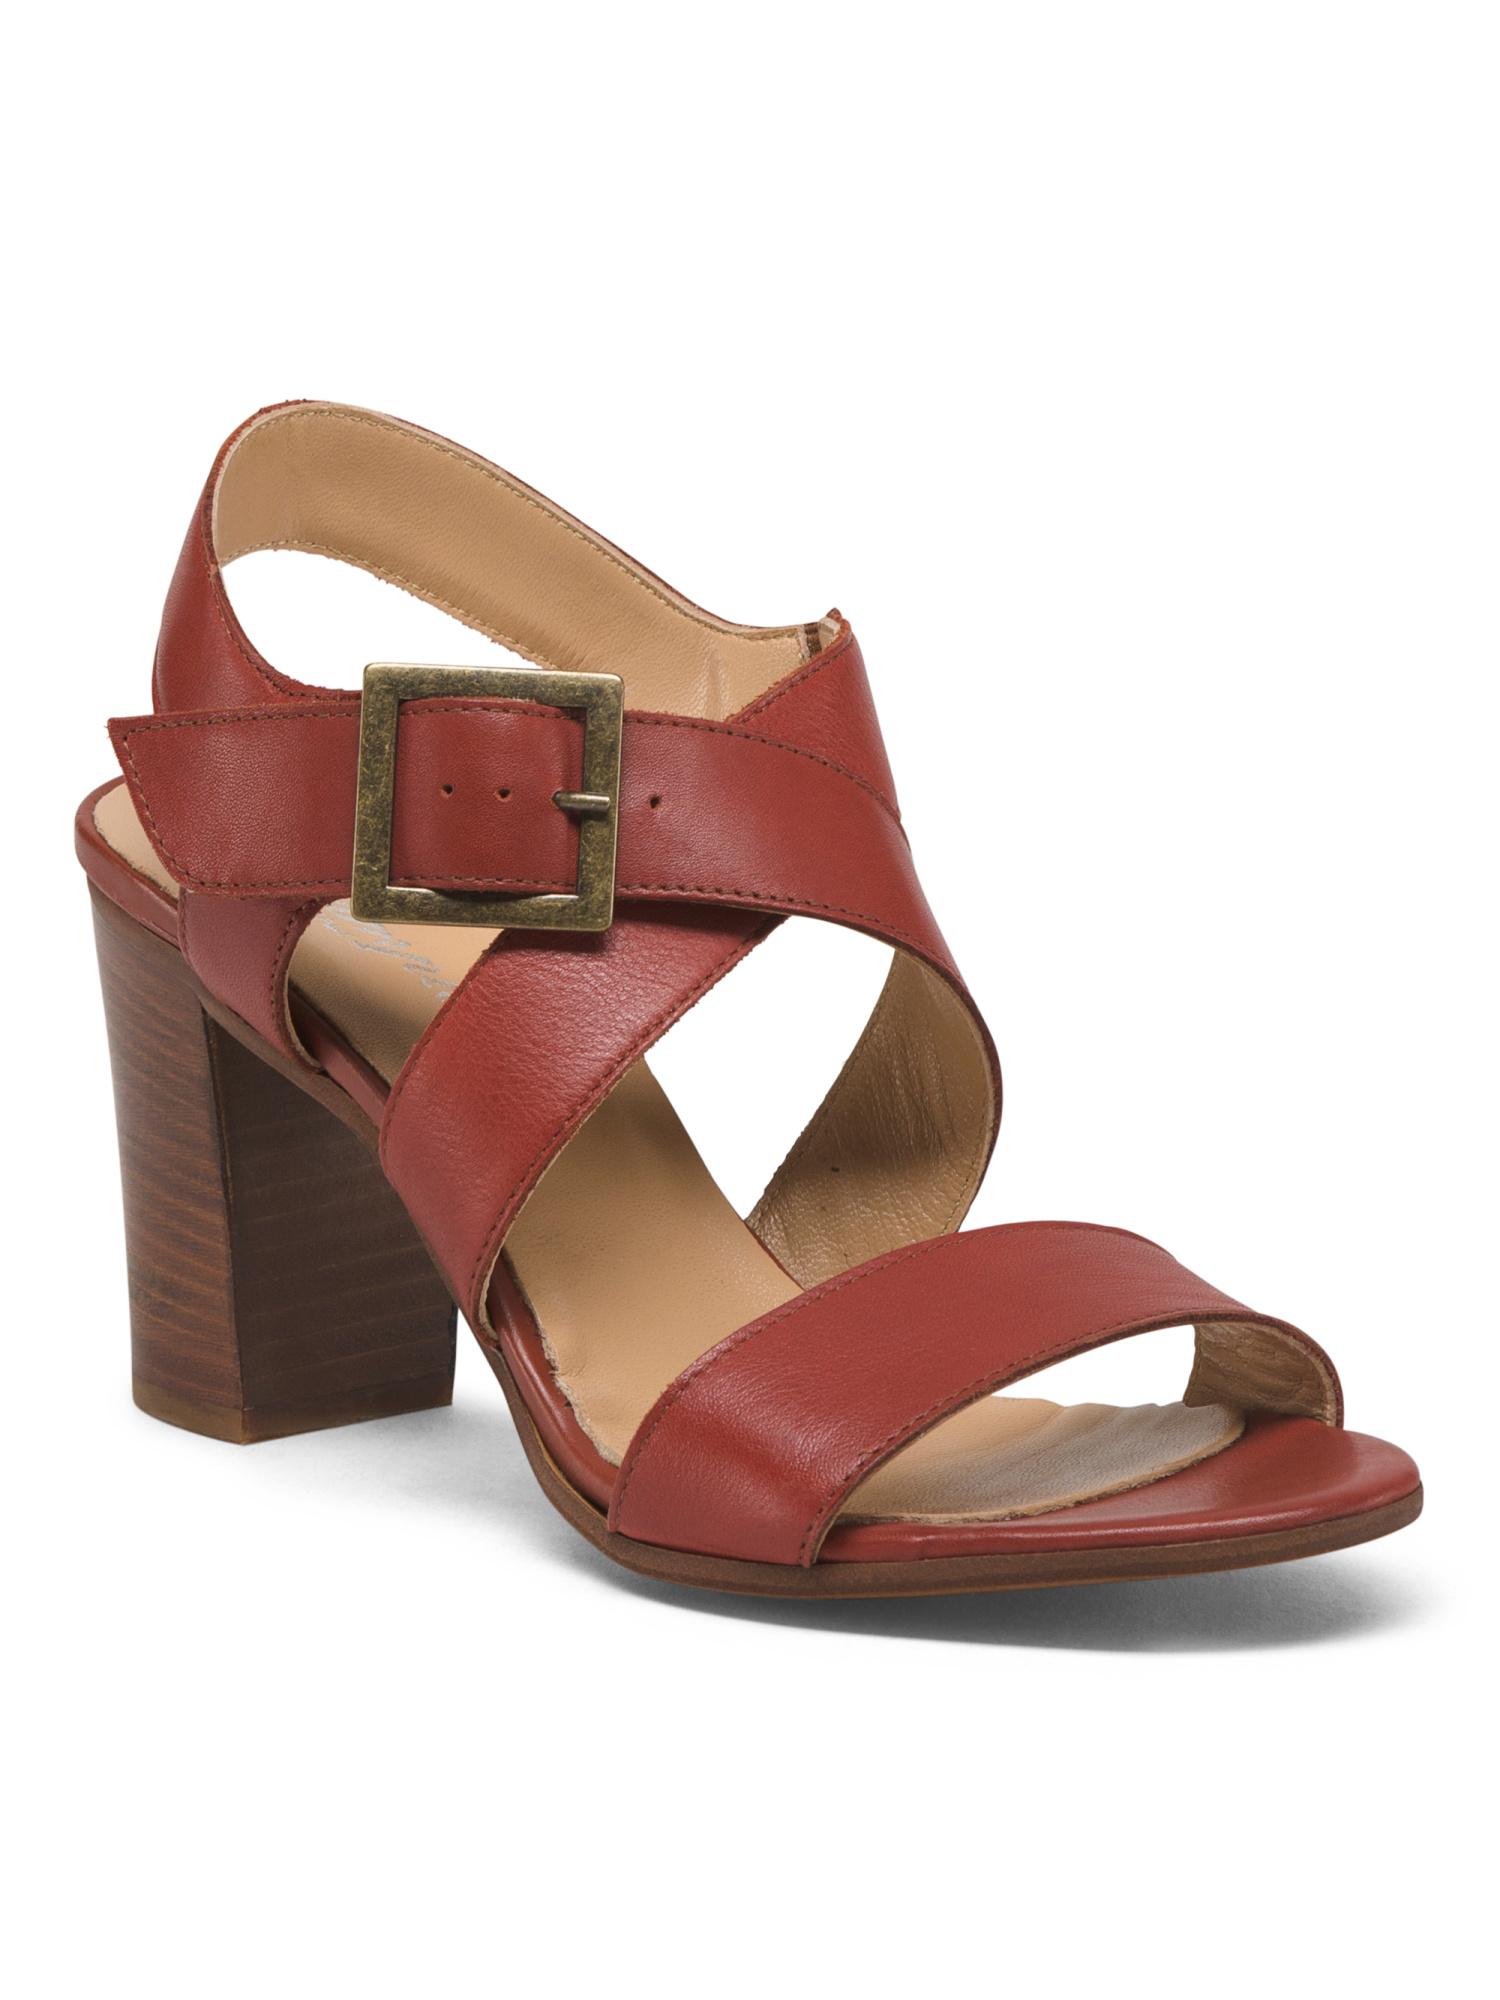 Tj Maxx Made In Italy Stacked Heel Leather Sandals in